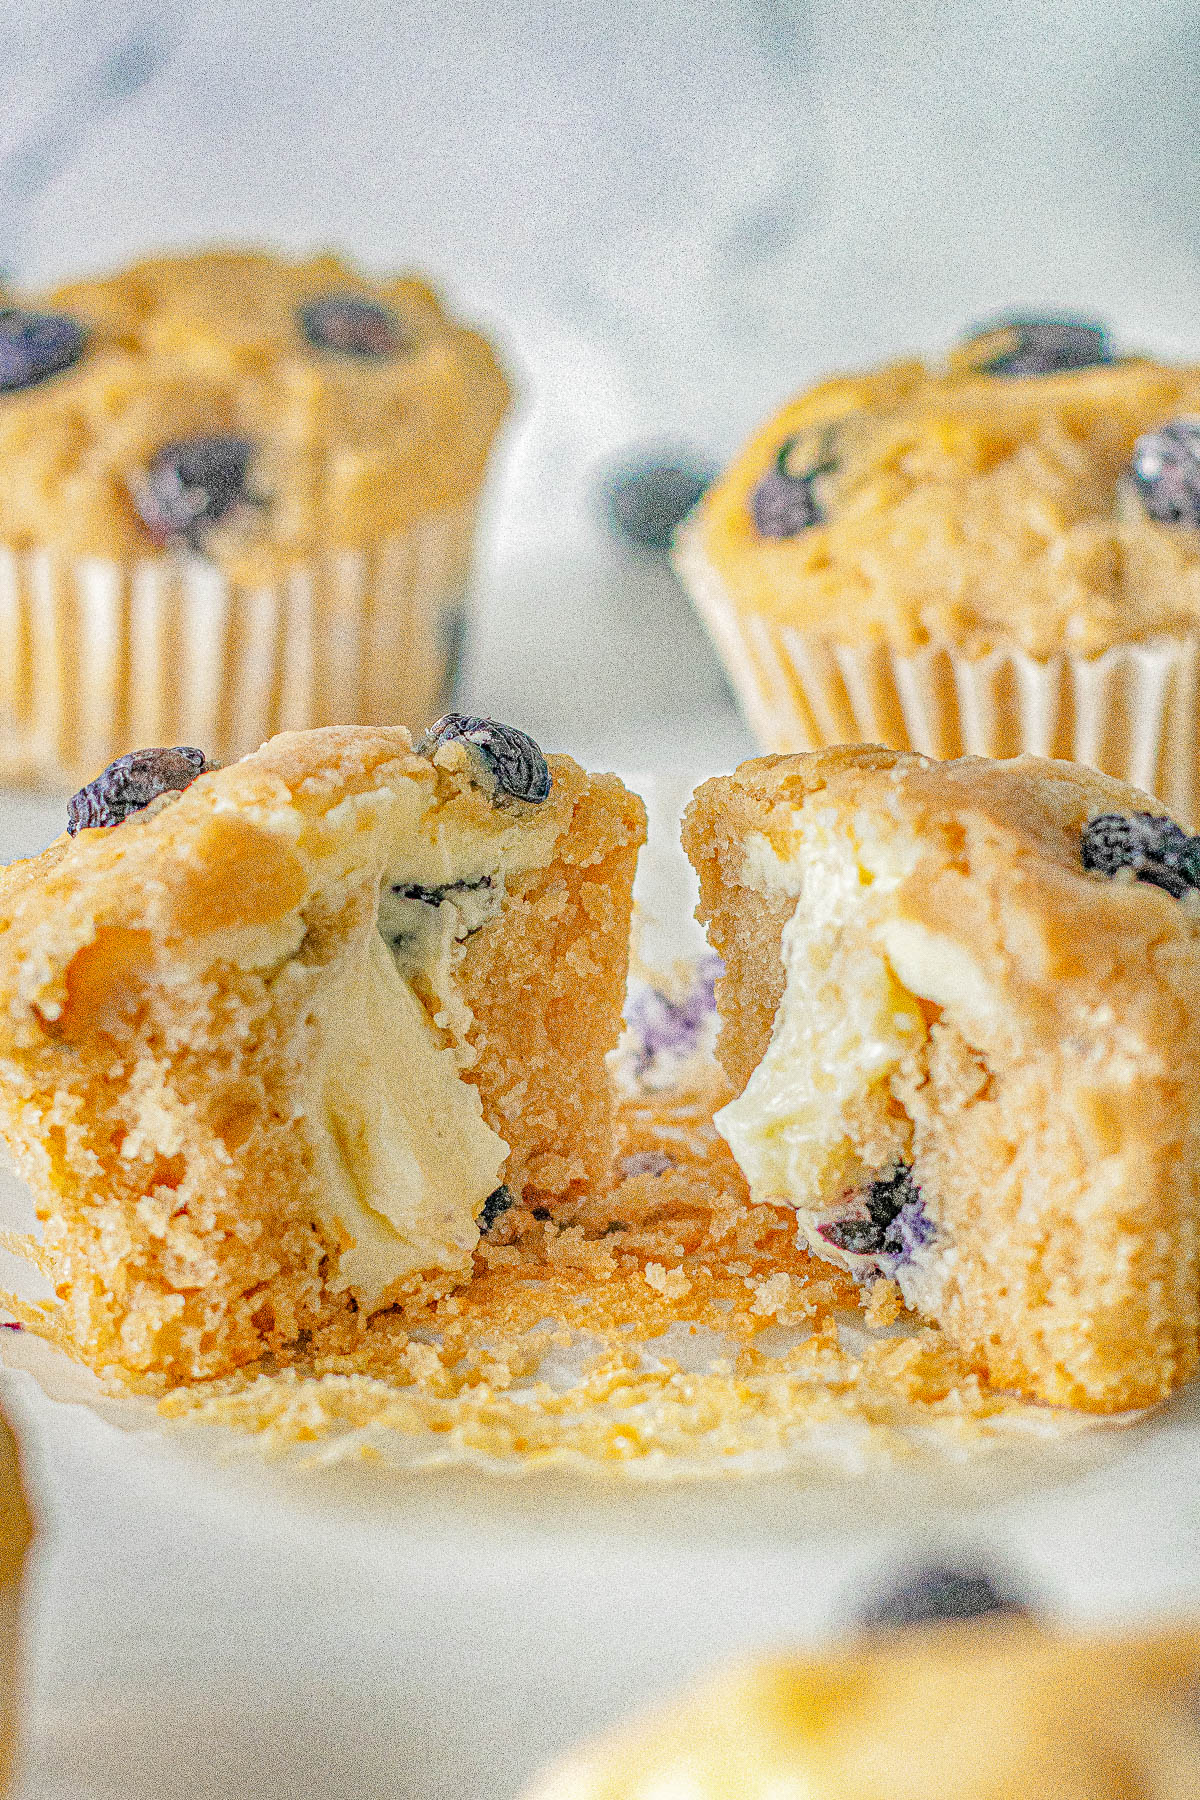 Blueberry Cream Cheese Muffins – These FAST and EASY blueberry muffins are chock full of juicy blueberries and they’re filled with tangy-sweet cream cheese! You’re going to fall in LOVE with their super soft and moist texture! Perfect for breakfast, brunch, snacks, or dessert! No mixer required and you can use fresh or frozen berries.